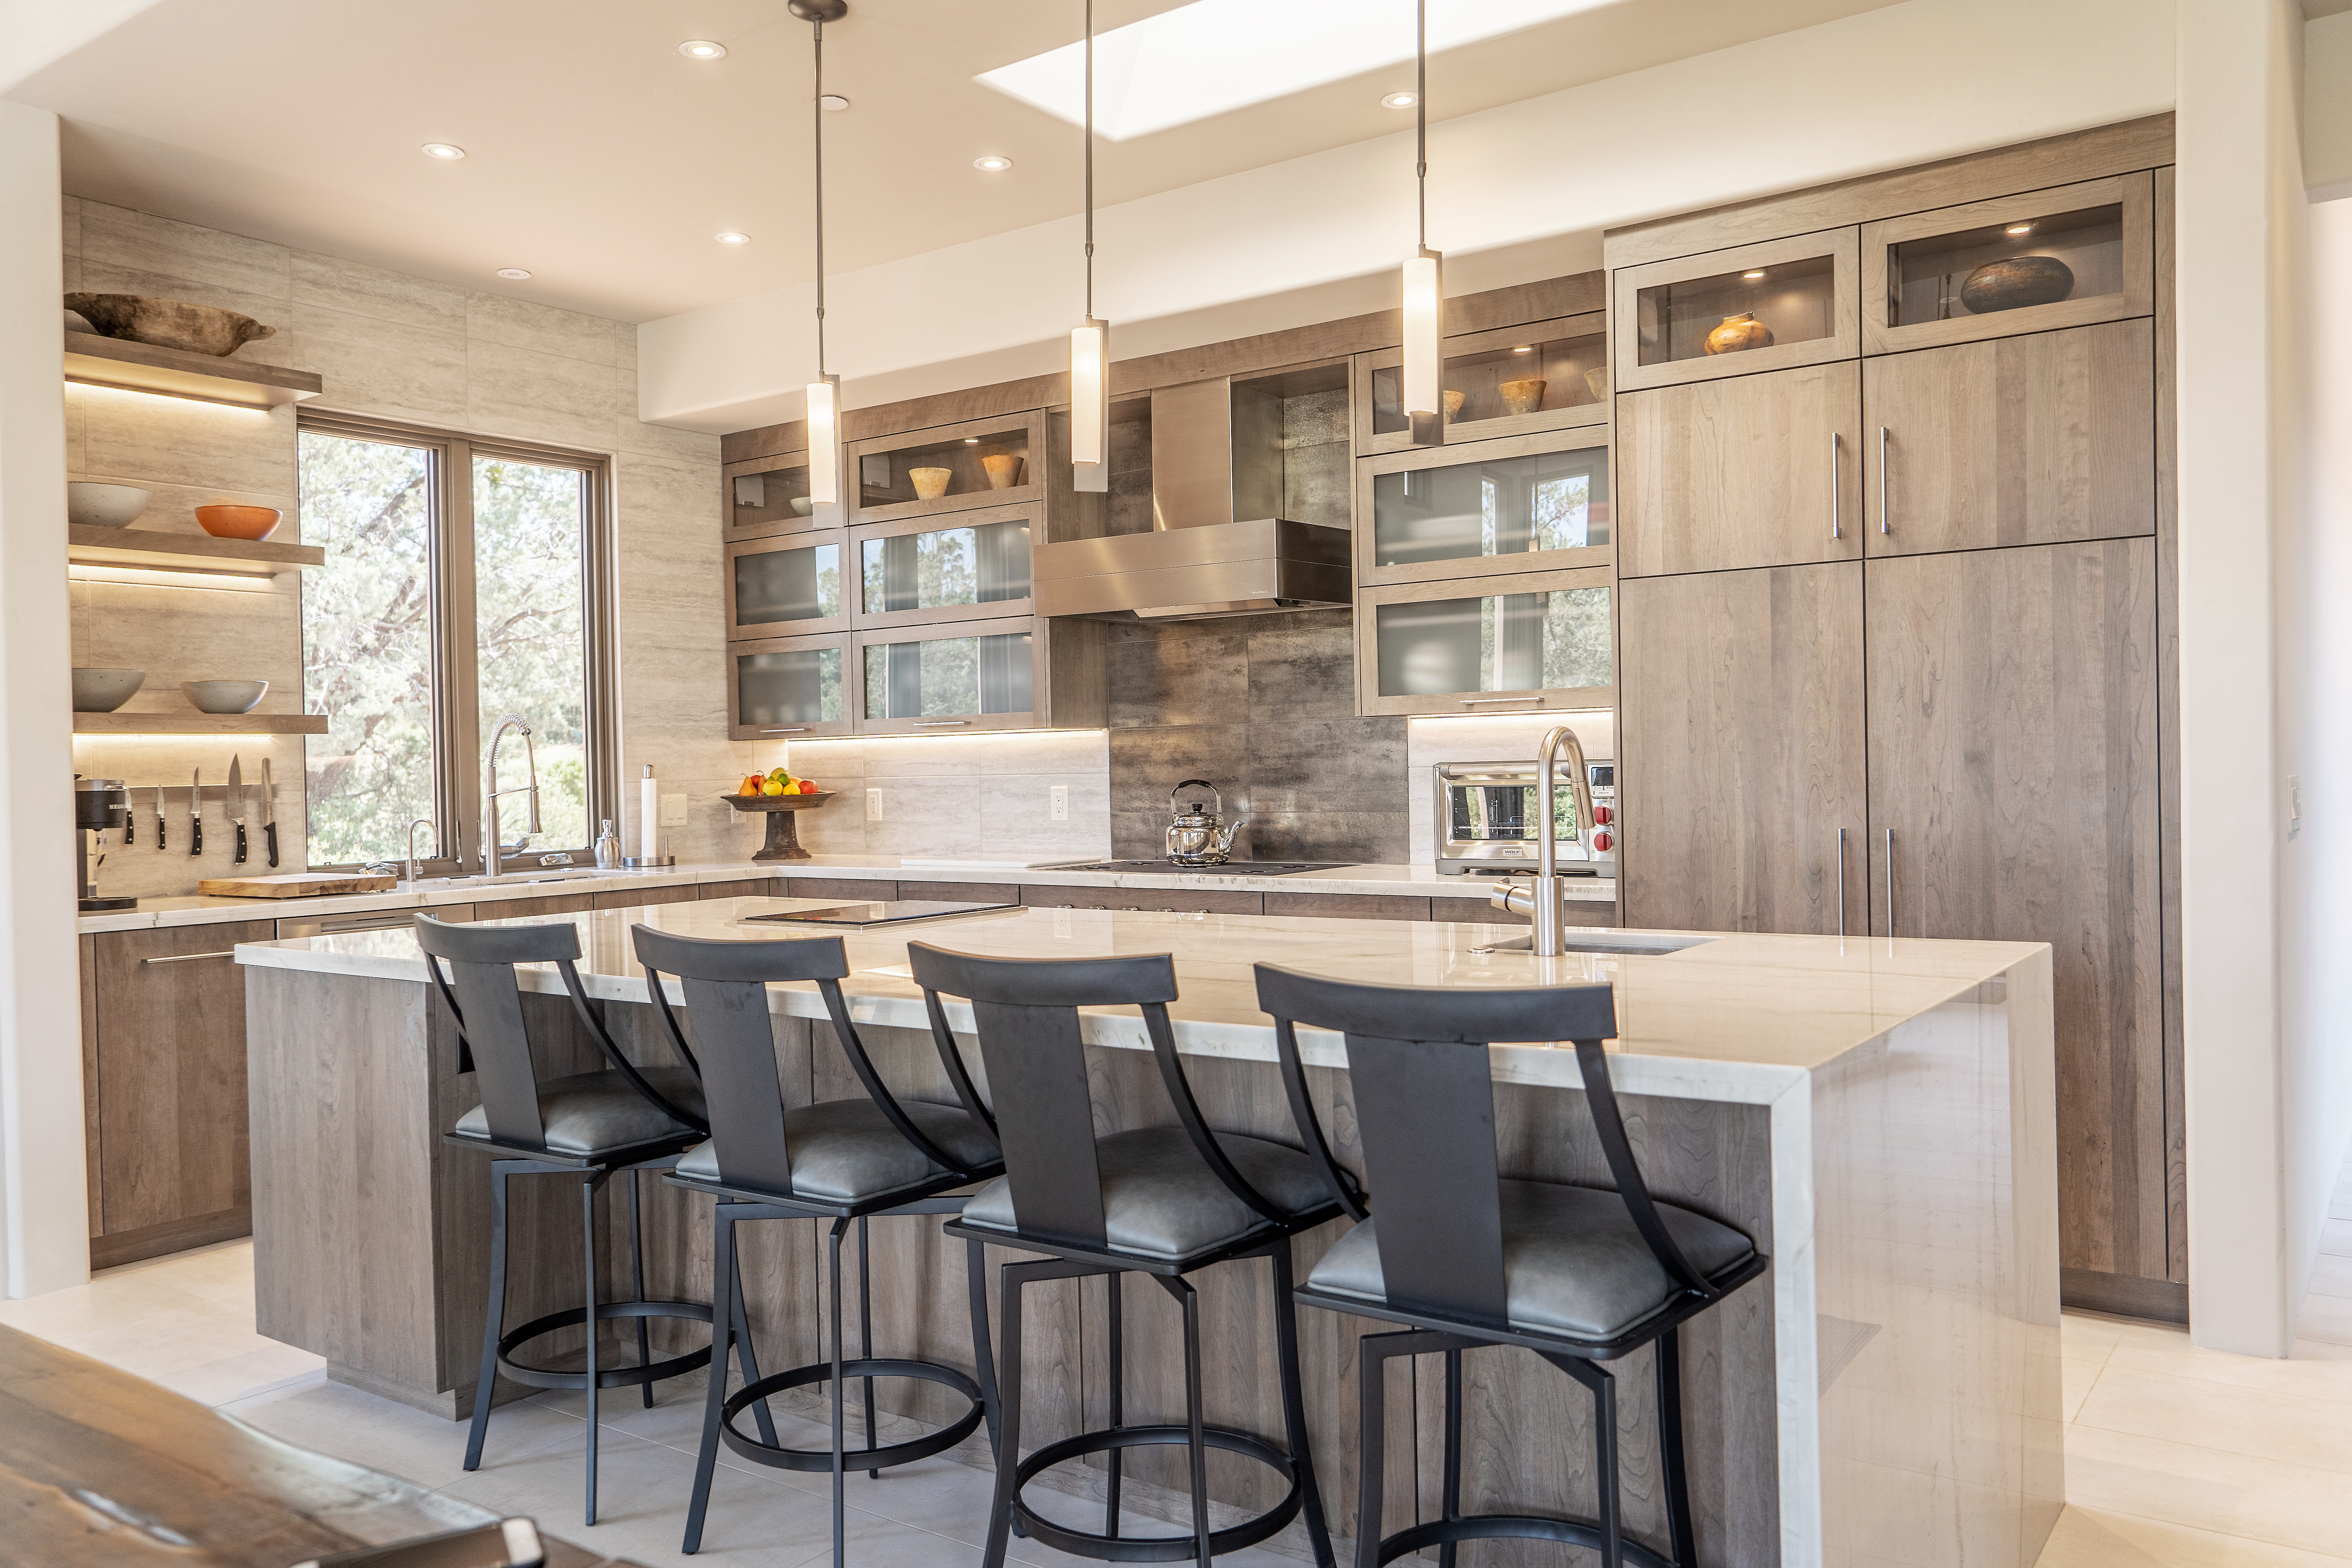 This modern kitchen has a waterfall kitchen island, seating for four, and stunning light gray-brown stained cabinets from Dura Supreme.